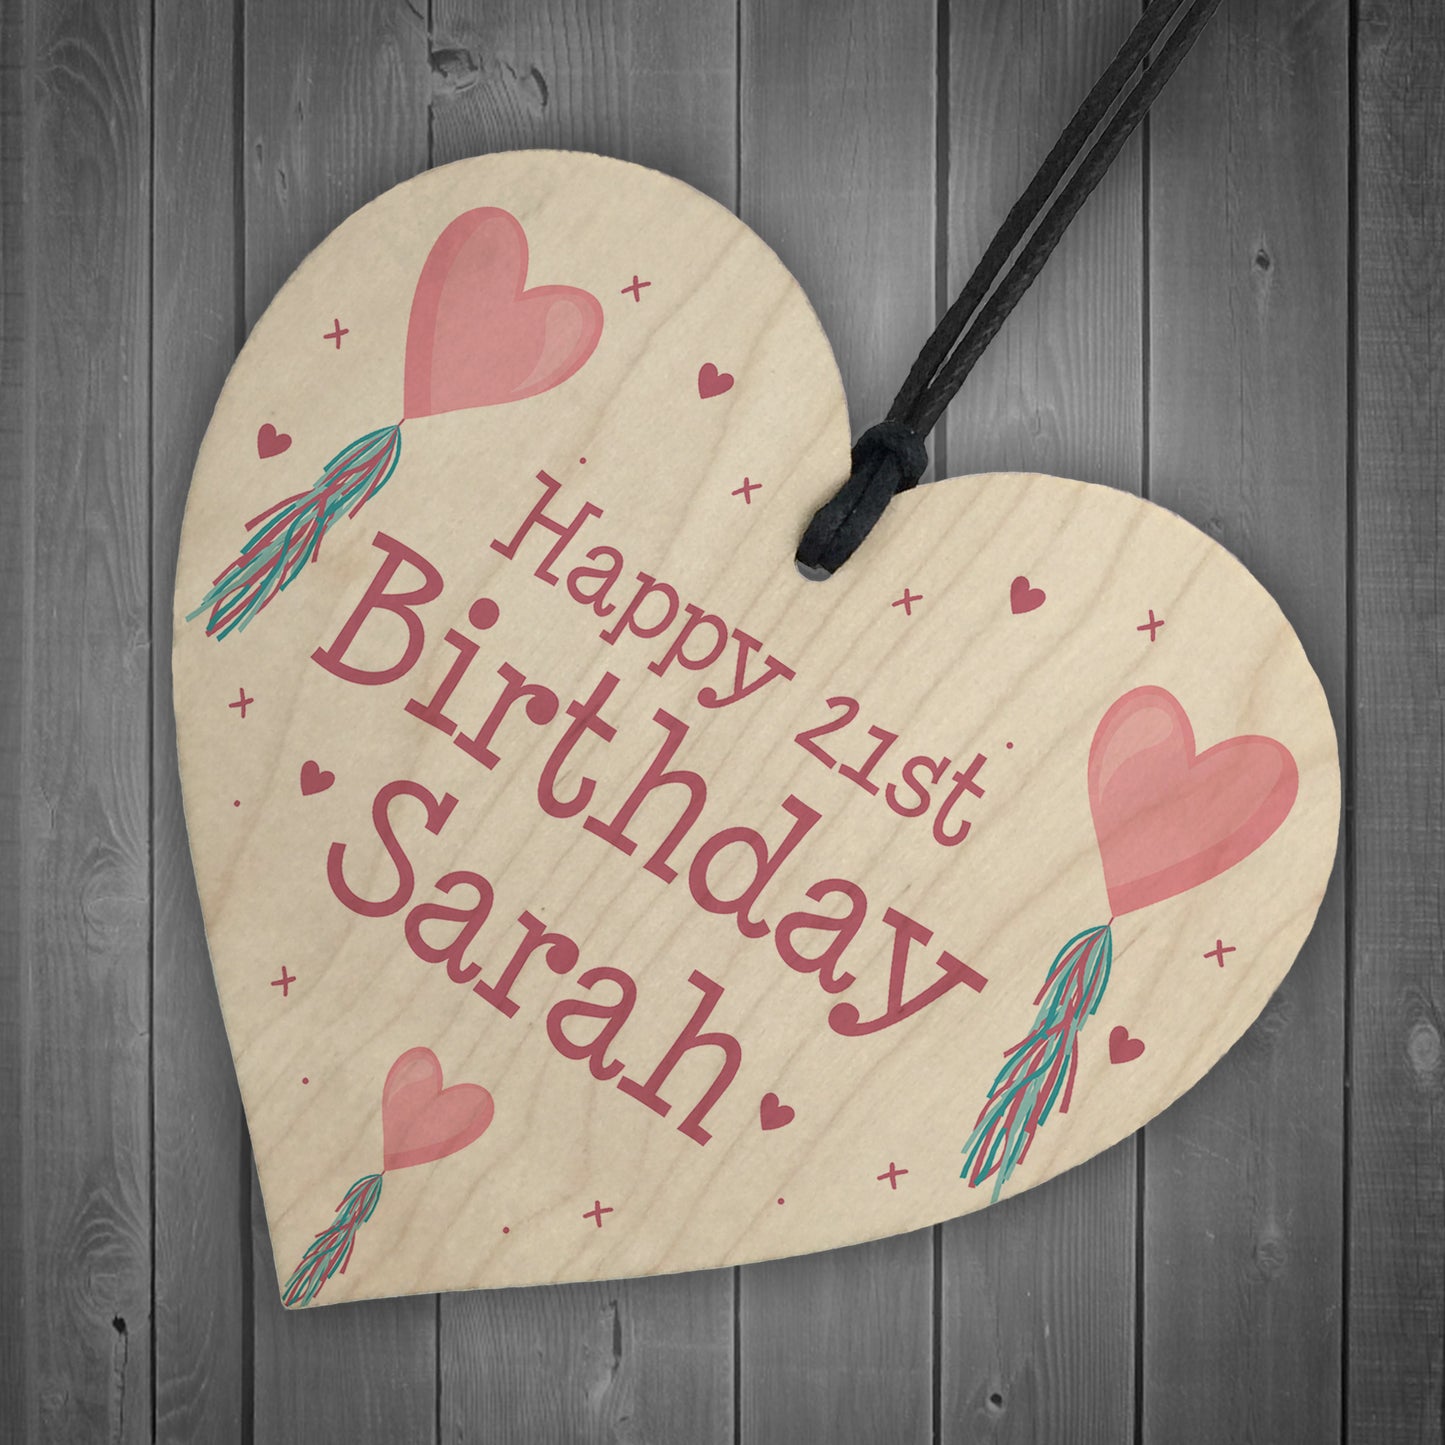 PERSONALISED Birthday Heart Gift For Her Wood Heart Gifts